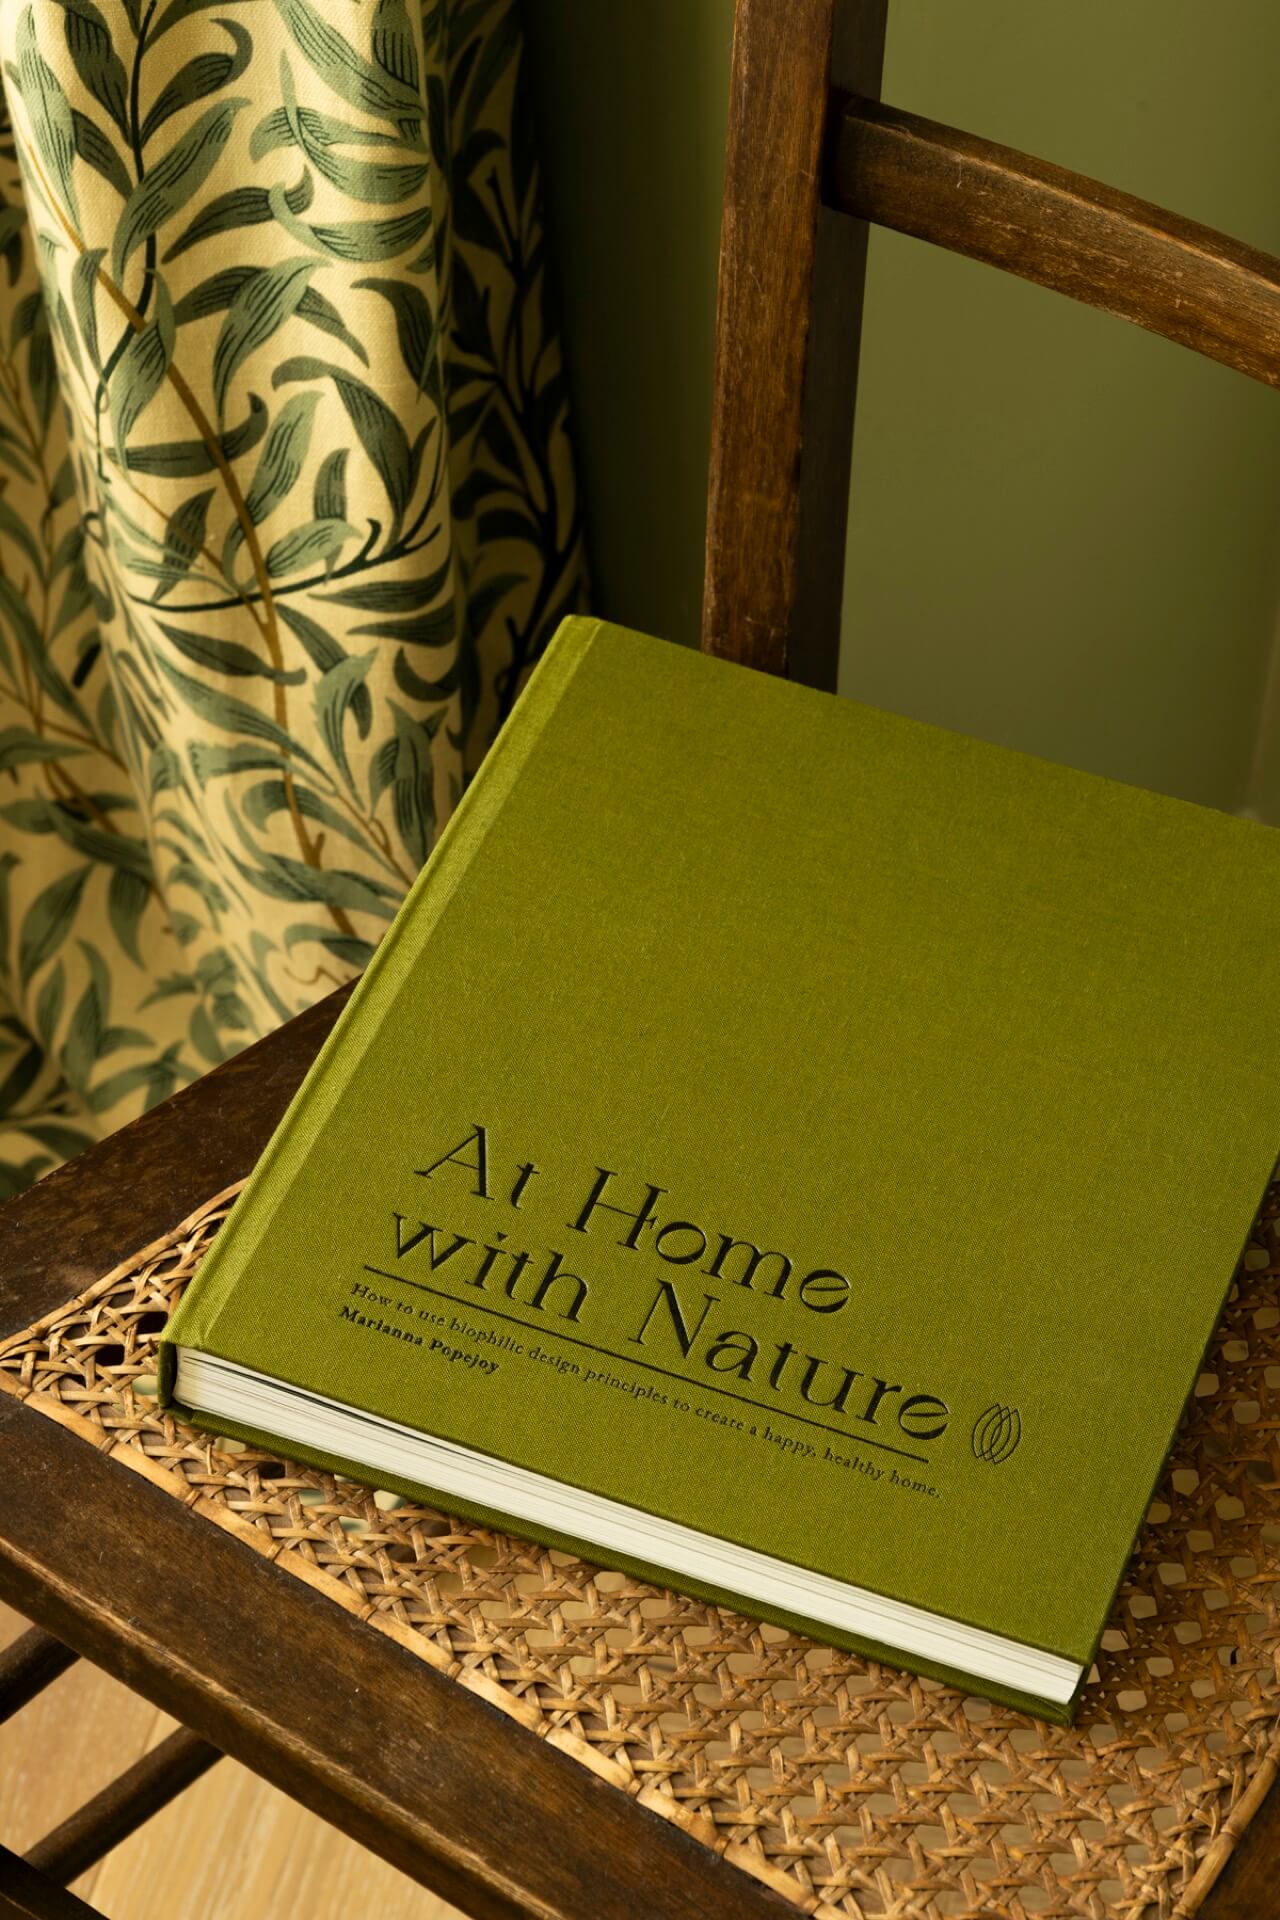 At Home with Nature - book about biophilic design by Marianna Popejoy